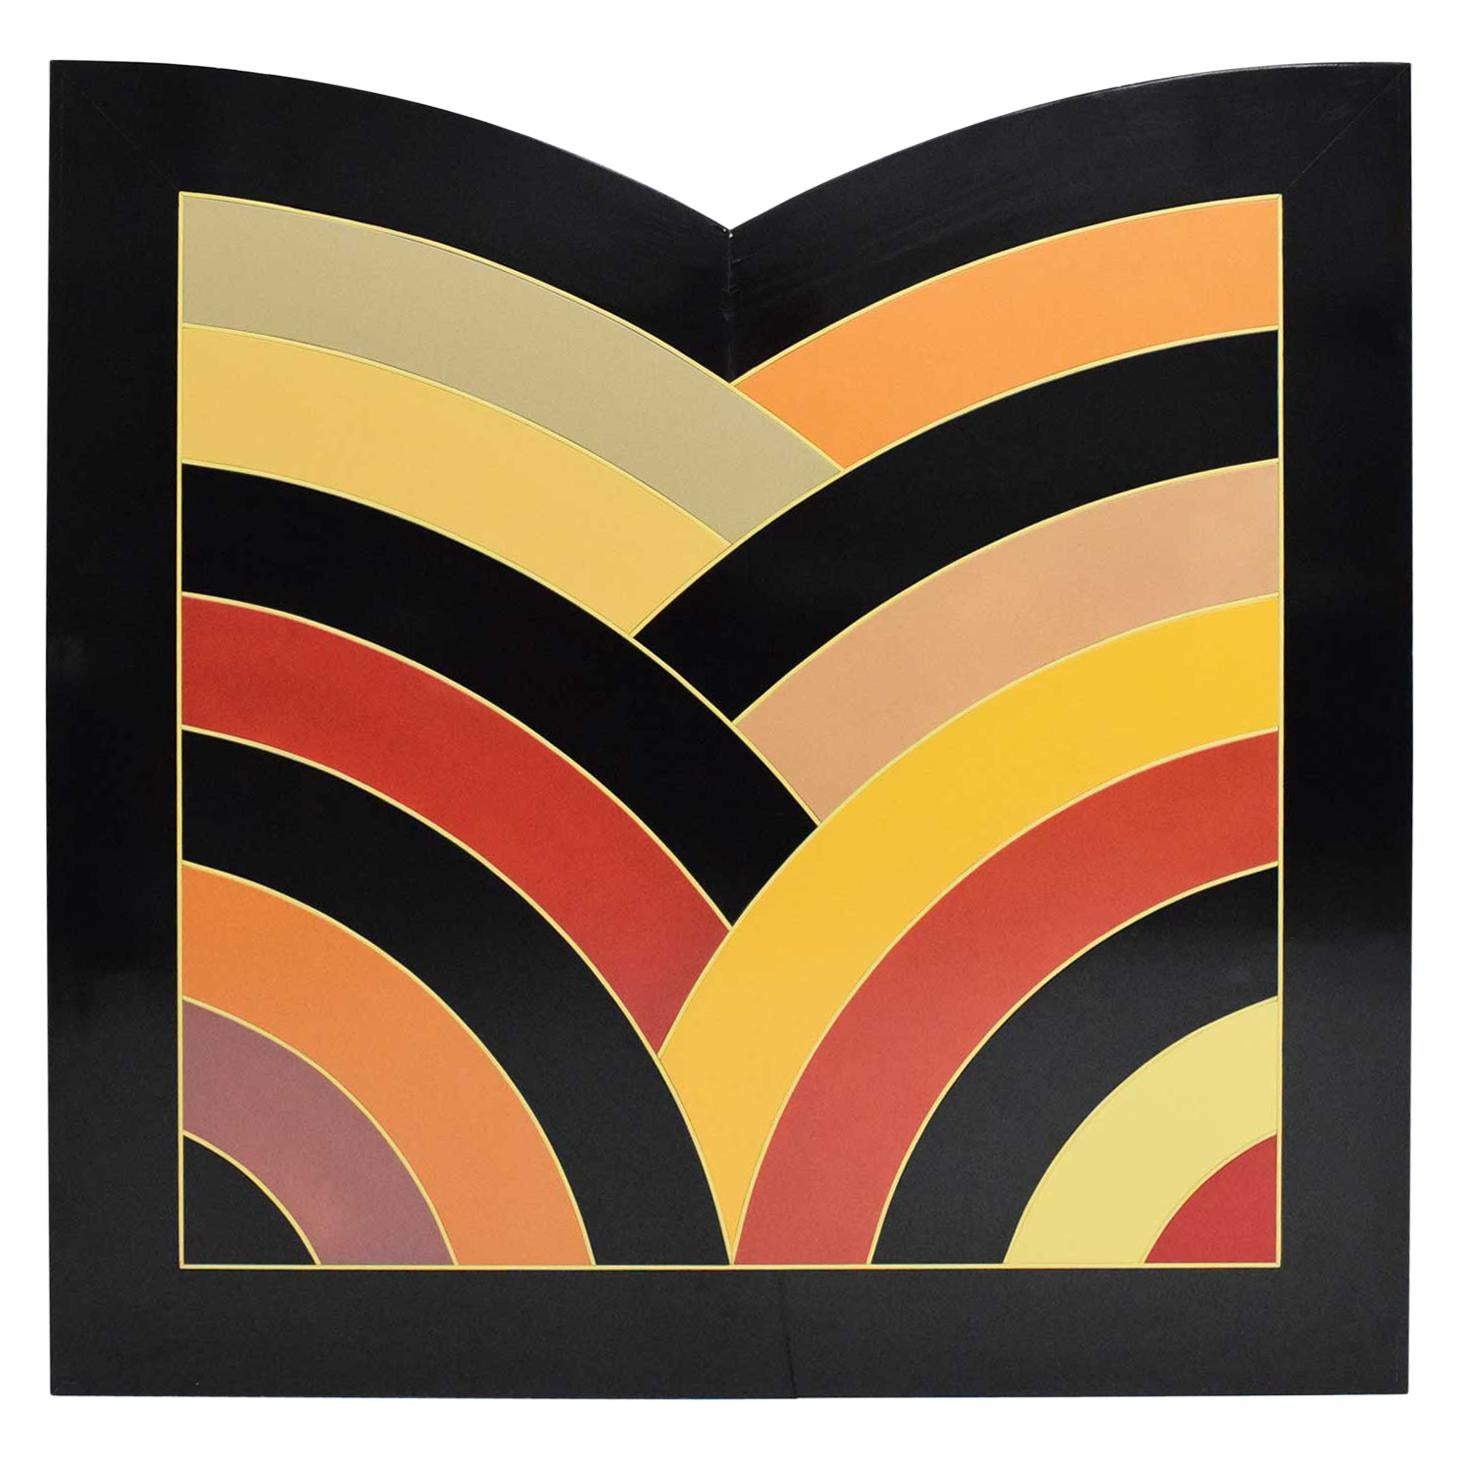 Large Painting on Board in Style of Frank Stella's Award Winning MOMA Logo For Sale